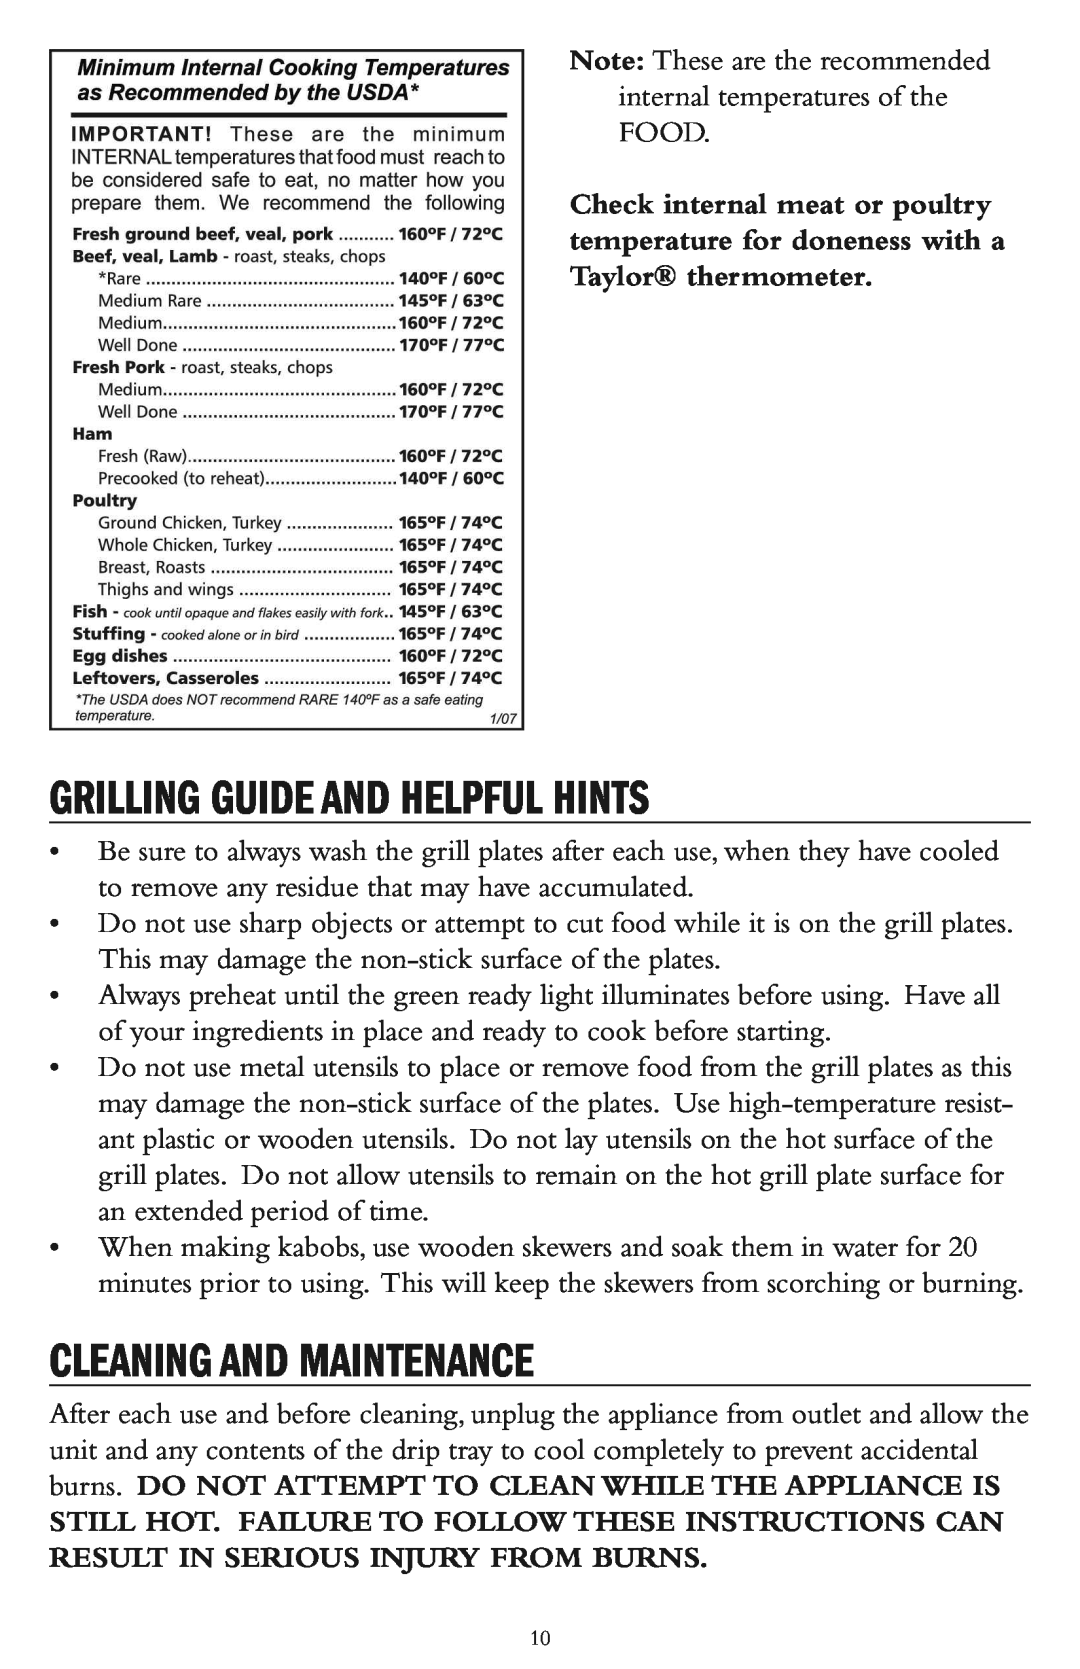 Taylor AG-1300-BL instruction manual Grilling Guide And Helpful Hints, Cleaning And Maintenance 